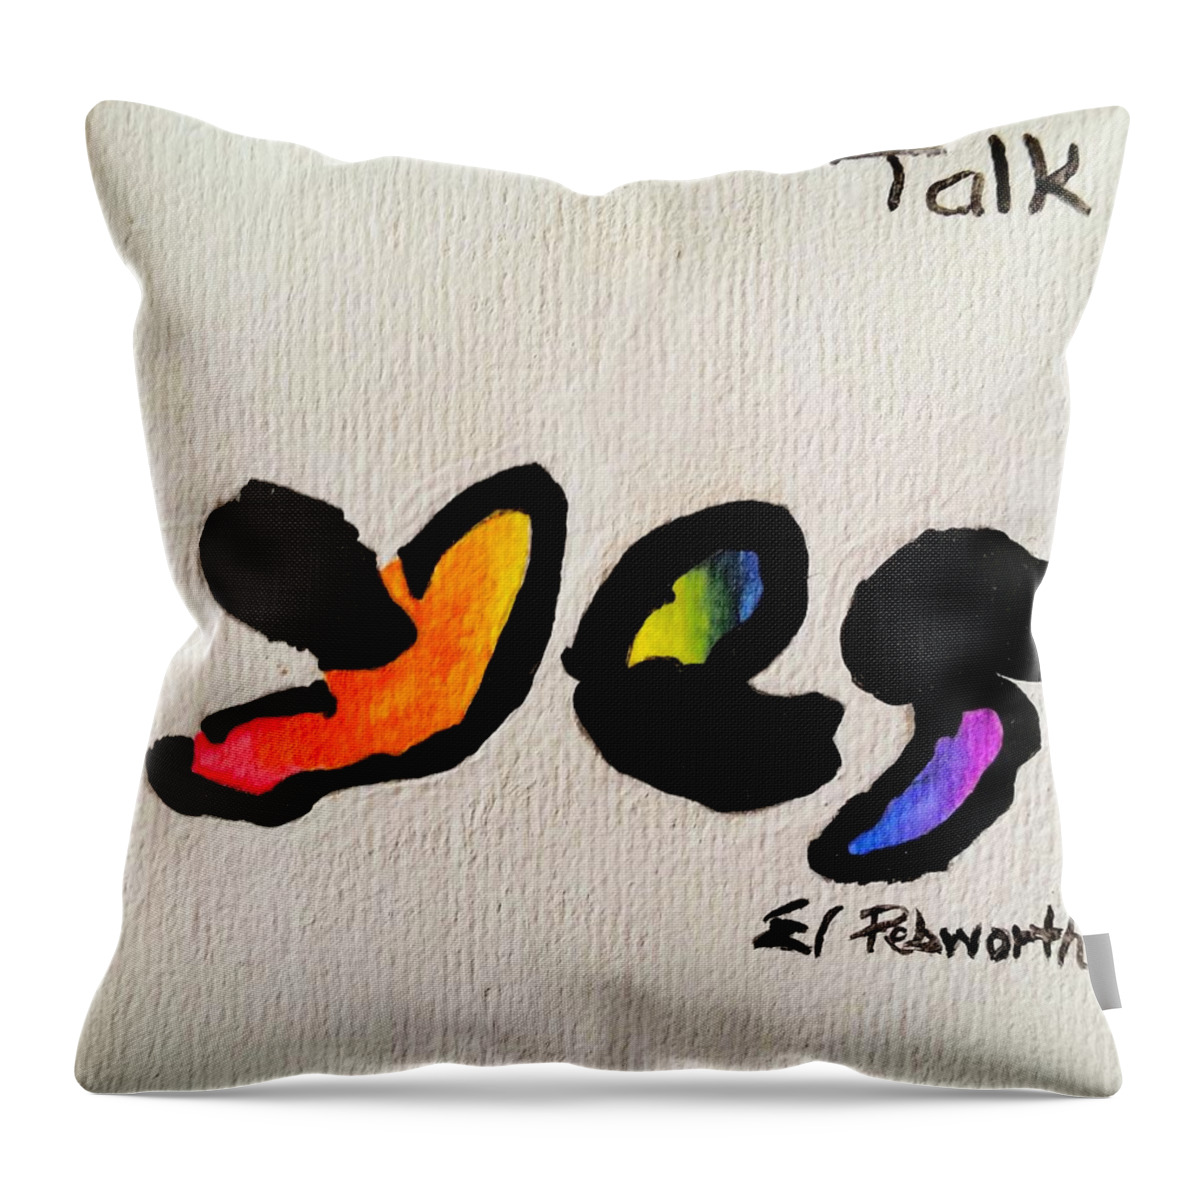 Inking Throw Pillow featuring the painting YES  Talk by Edward Pebworth